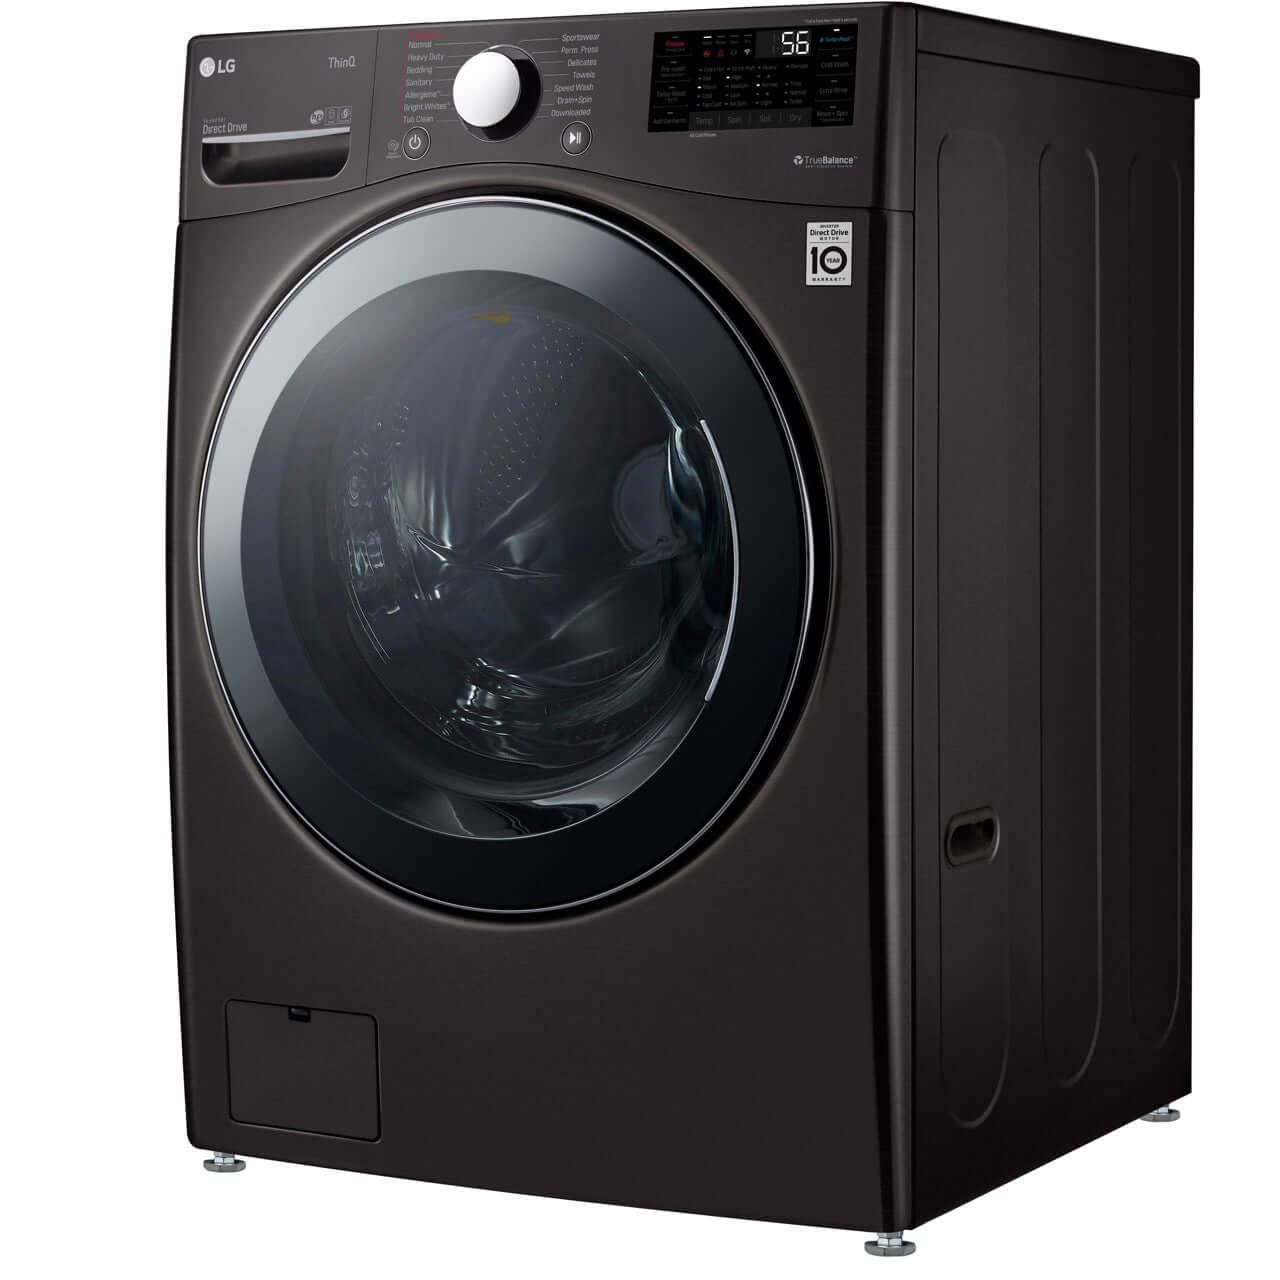 LG 4.5-Cu. Ft. Front Load Washer and Dryer Combo in Black Steel (WM3998HBA)